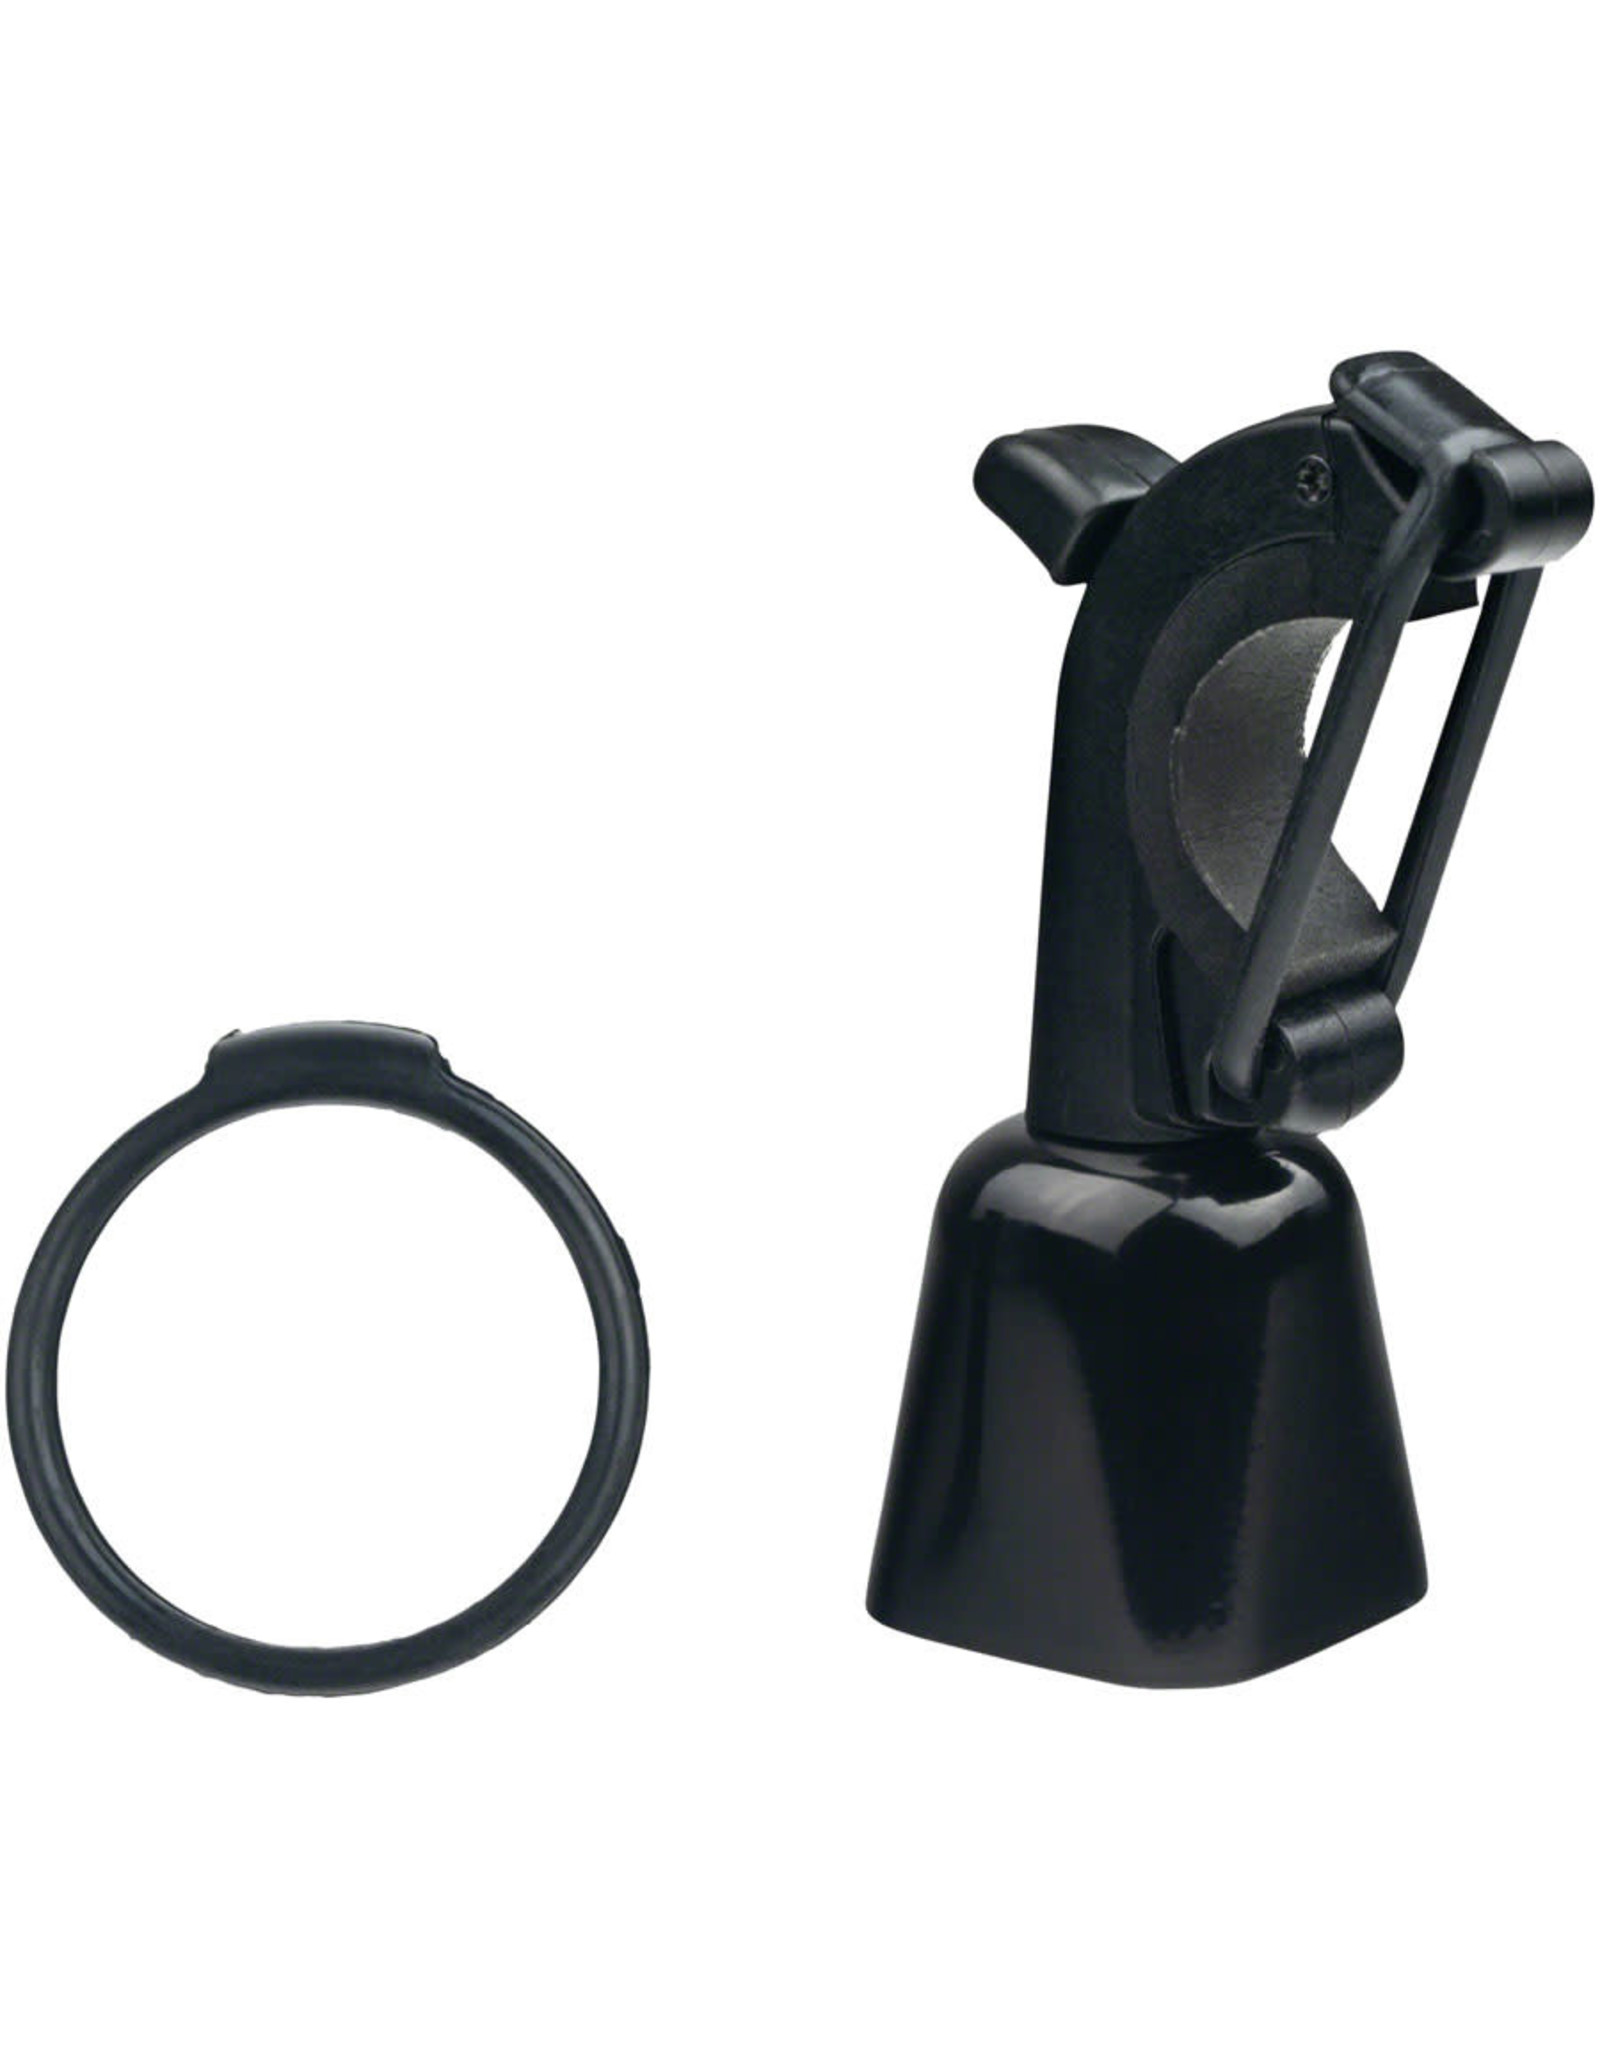 Timber MTB Timber MTB Bell: Black, Quick Release